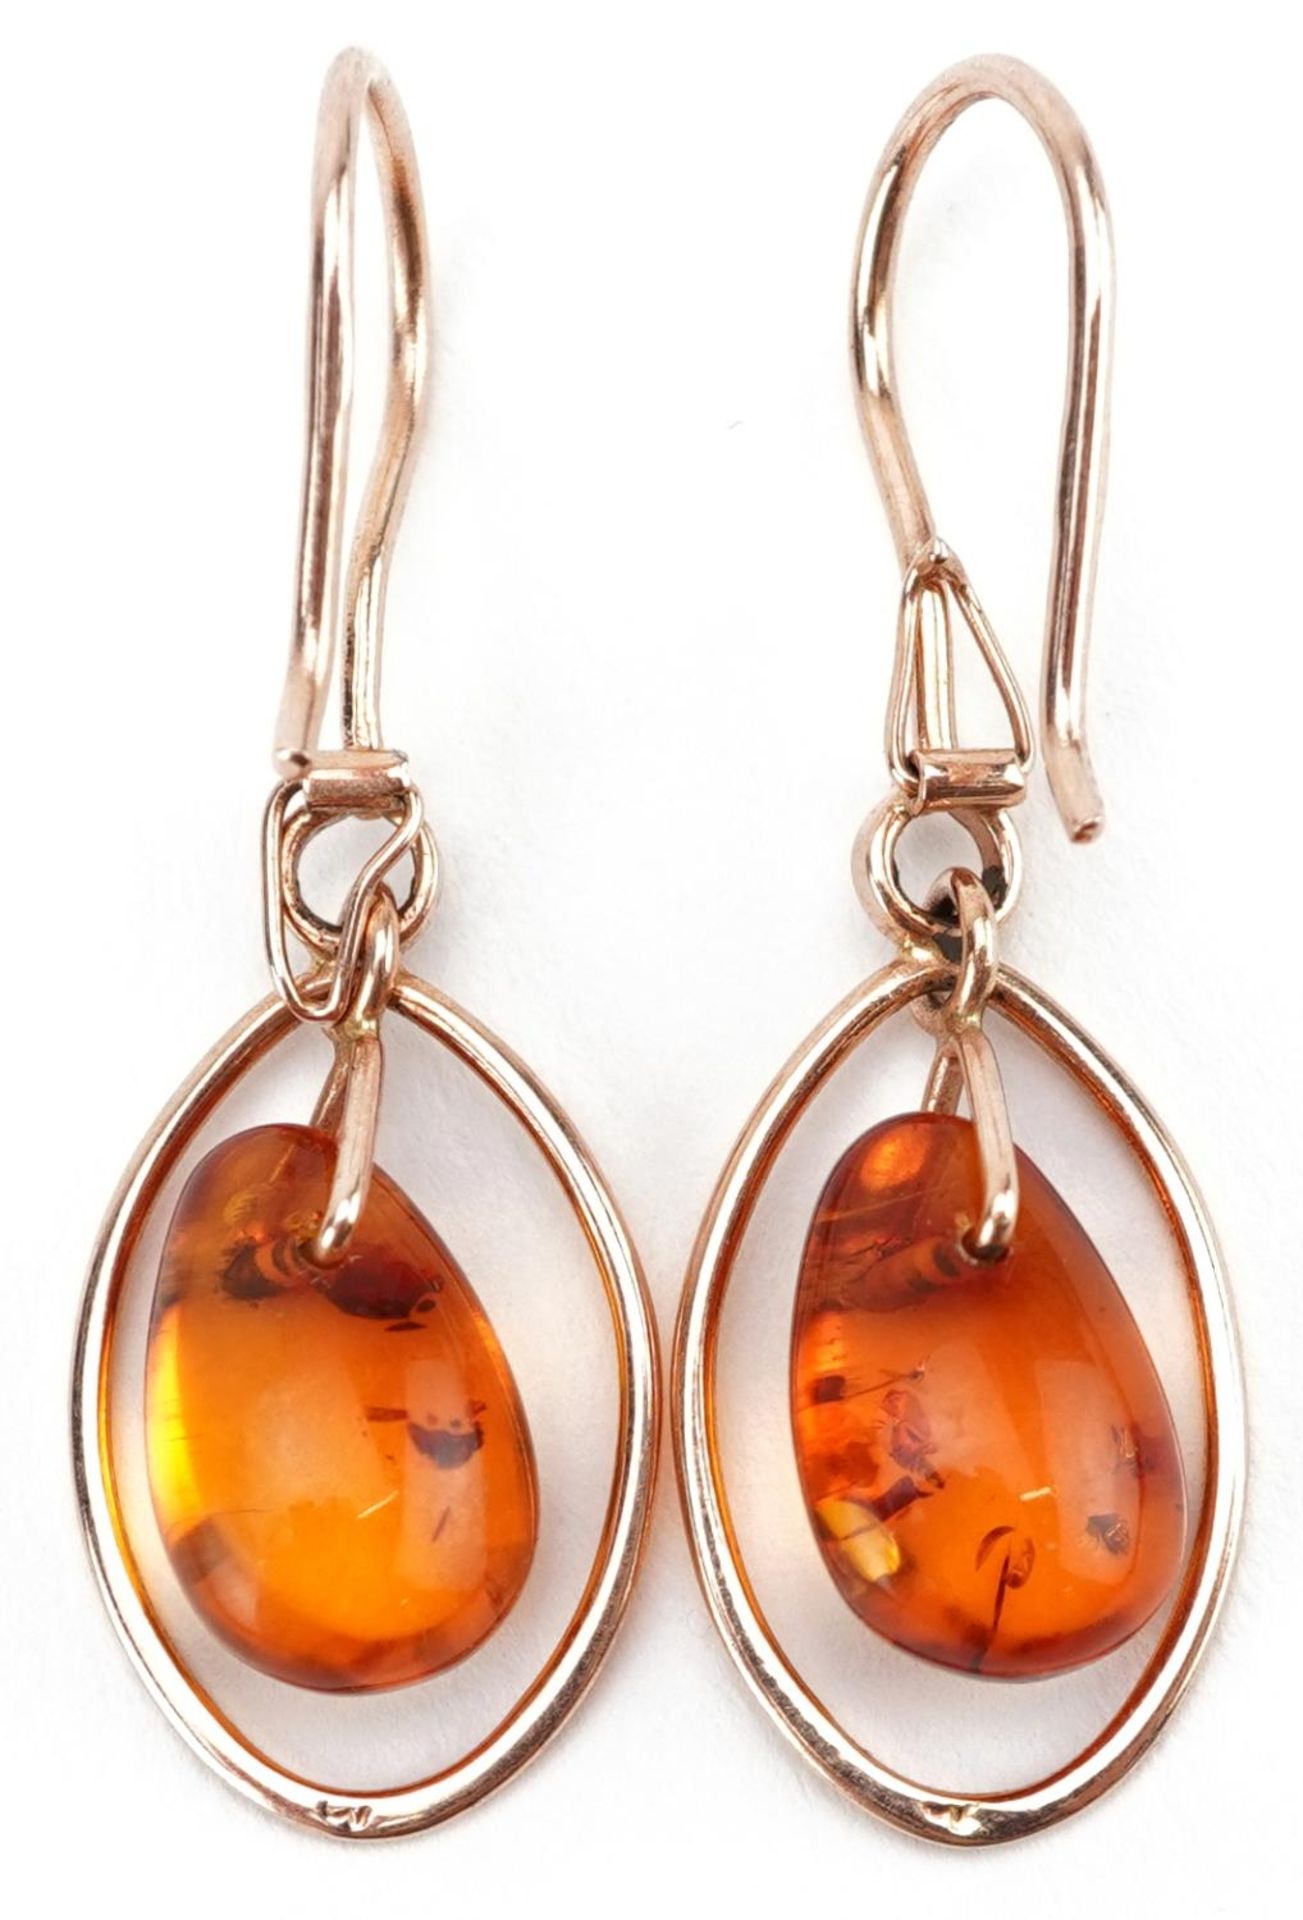 Pair of Russian 14ct gold natural amber drop earrings, 3.8cm high, 2.7g - Image 2 of 3